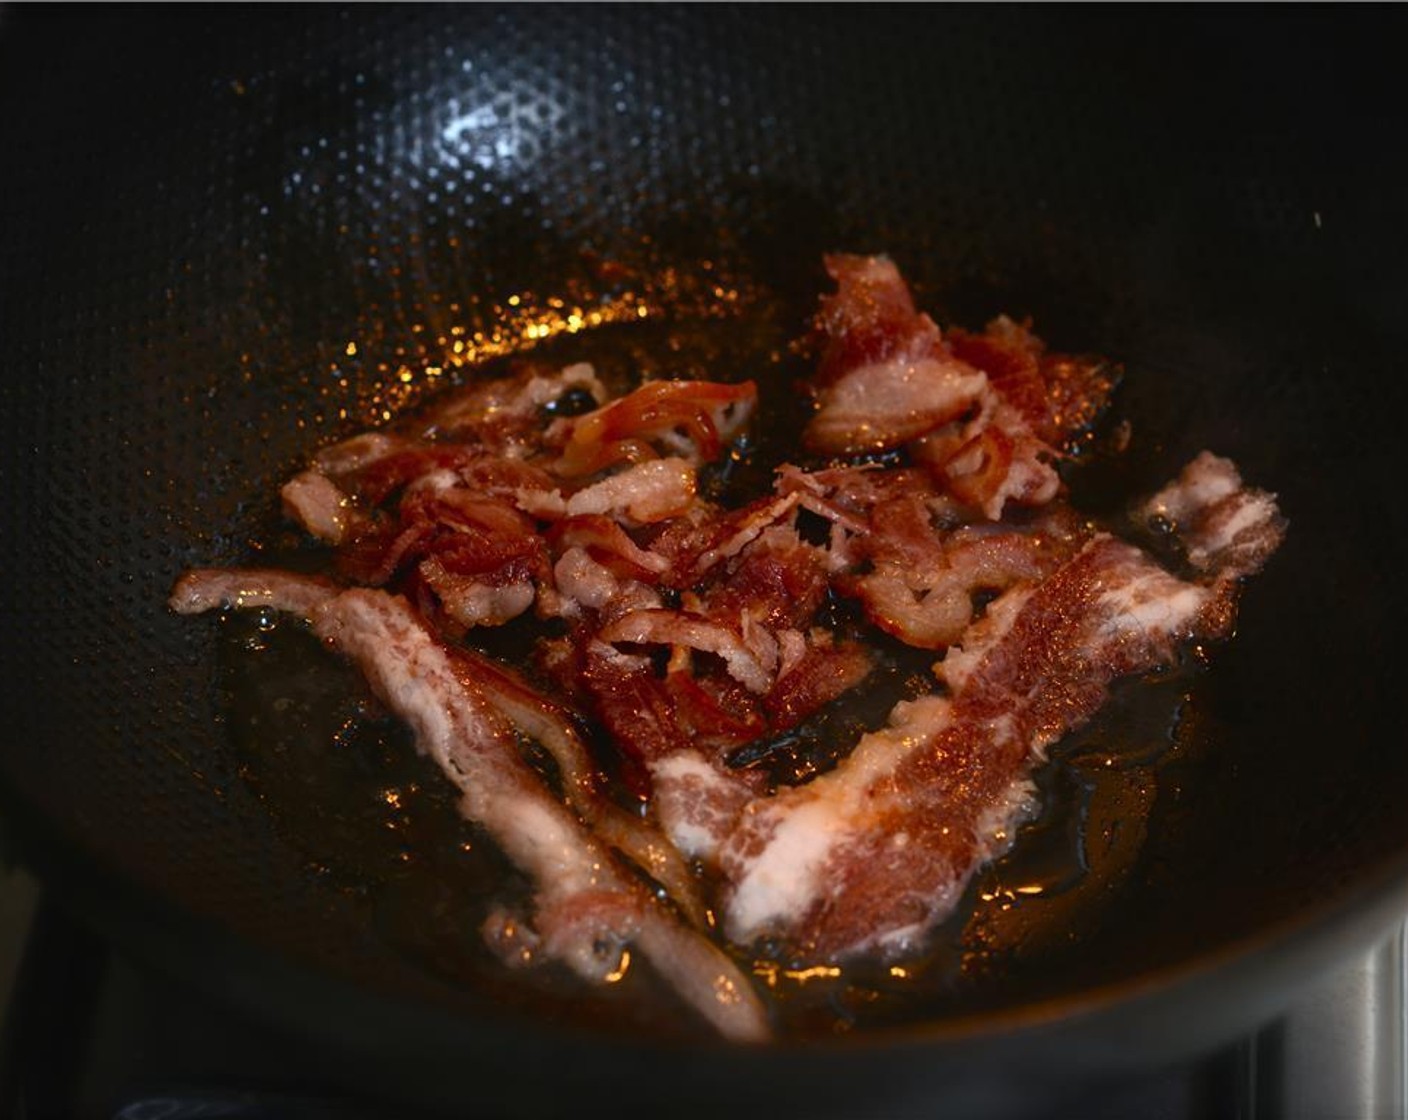 step 1 In a large Dutch oven or heavy bottom wok, cook the Bacon (6 slices) over low heat. Once the bacon is done, set it aside on a plate lined with a paper towel to cool. Once cooled, chop or crumble the bacon. Reserve the fat in the pan.